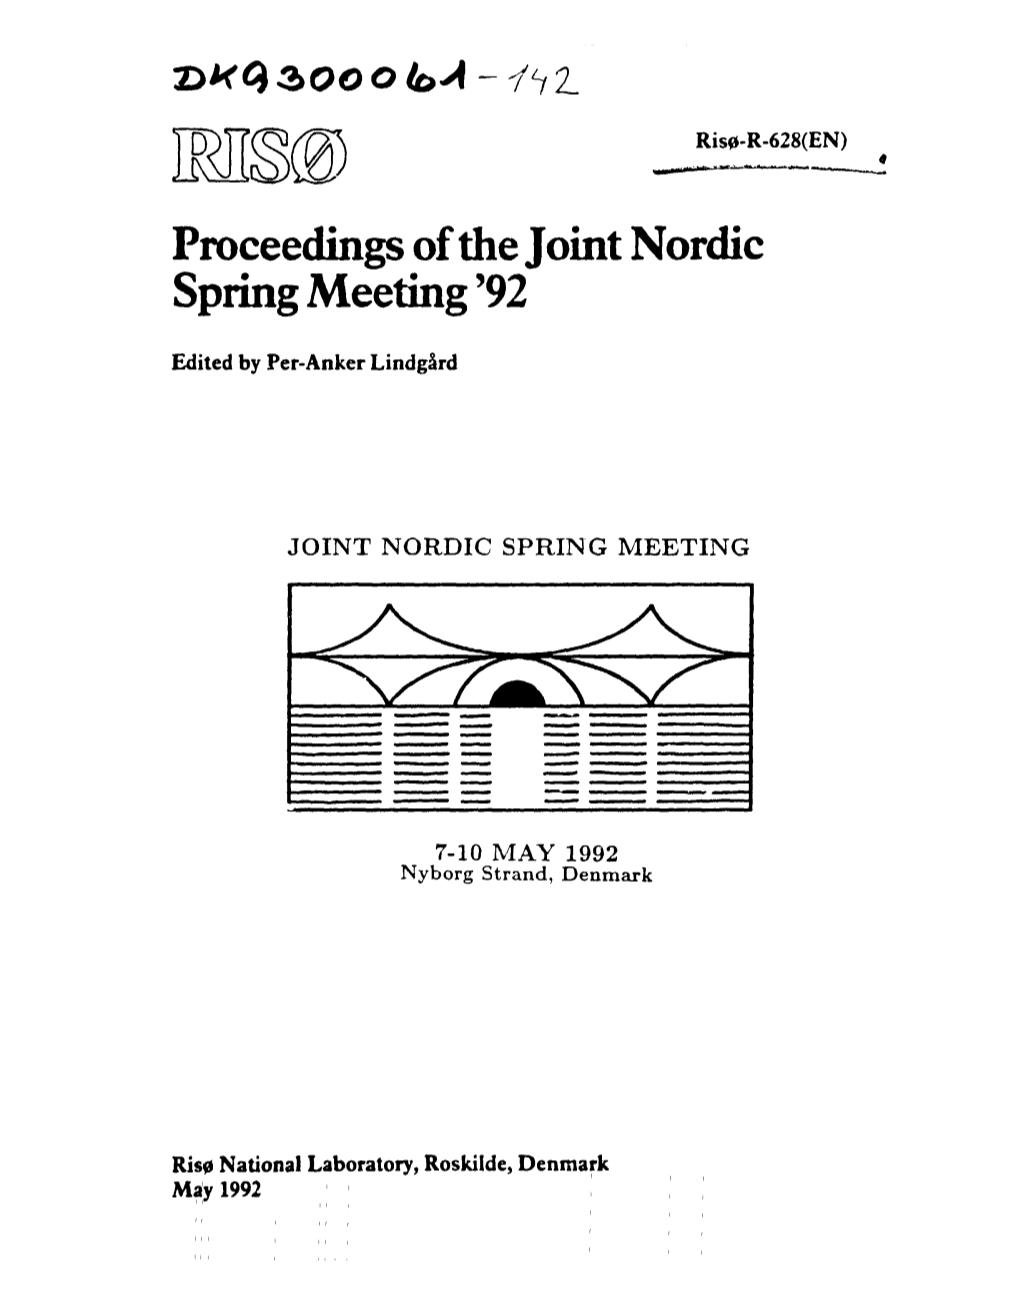 Proceedings of the Joint Nordic Spring Meeting '92